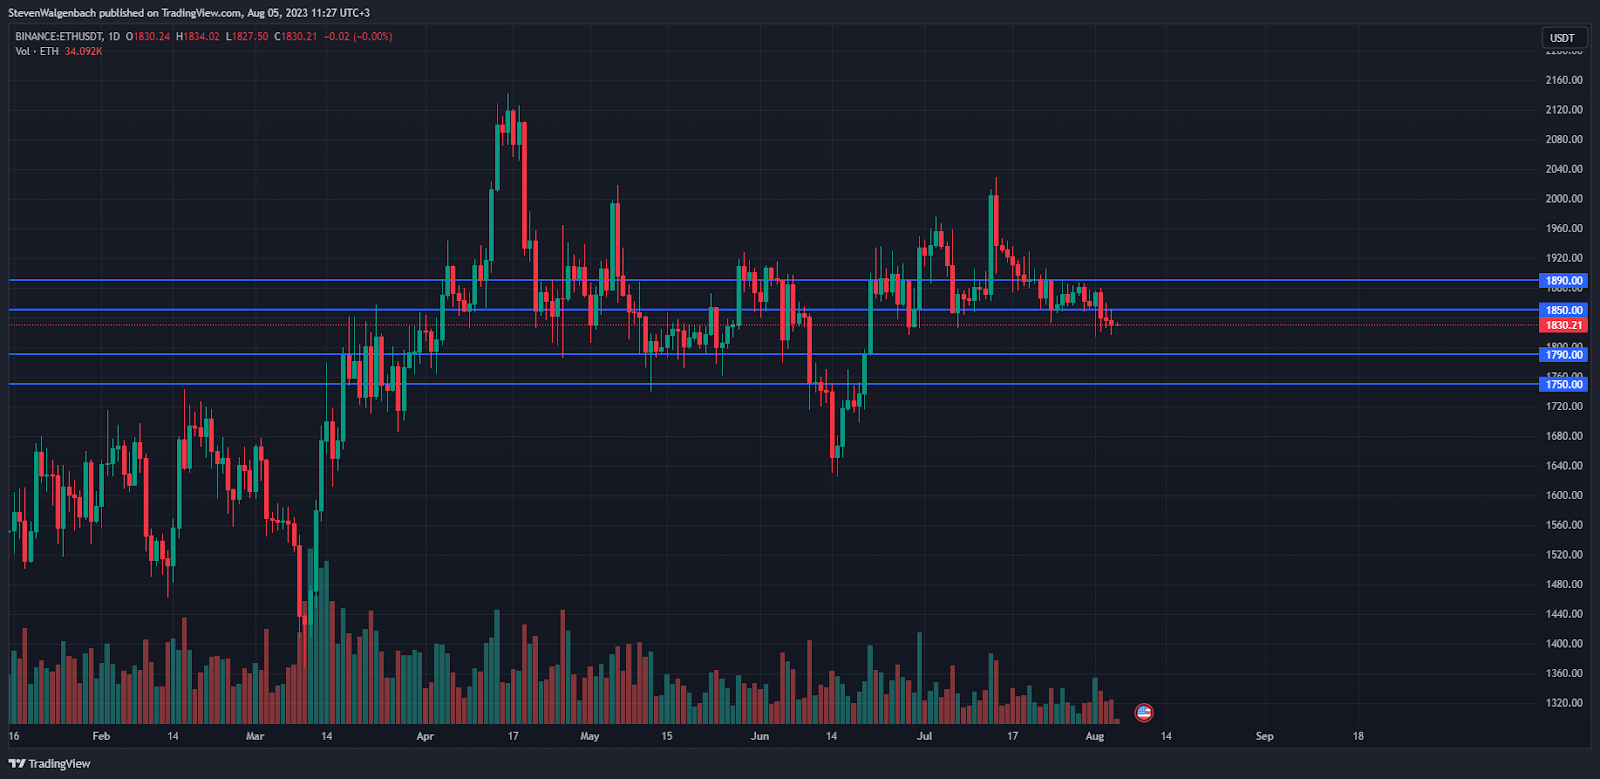 Daily chart for ETH/USDT (Source: TradingView)